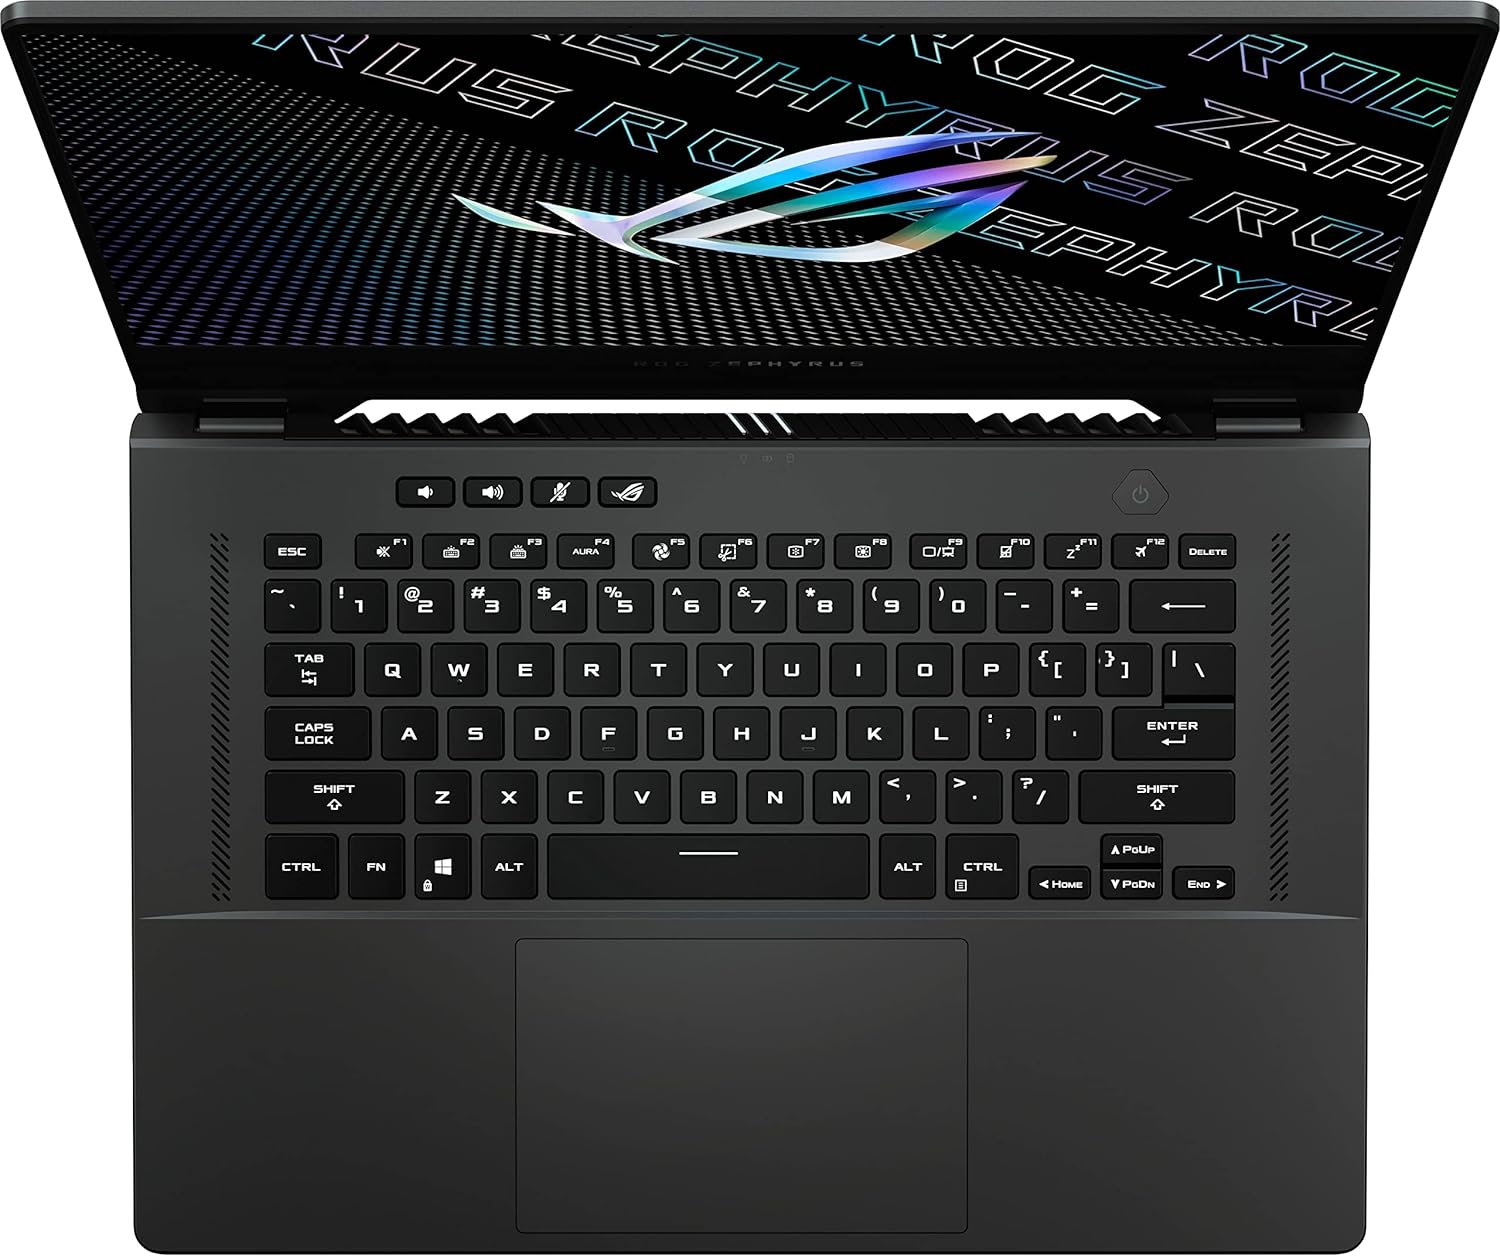 ASUS ROG Zephyrus G15 Gaming  Business Laptop (AMD Ryzen 9 5900HS 8-Core, 40GB RAM, 8TB PCIe SSD, GeForce RTX 3080, Win 11 Home) with MS 365 Personal, Hub